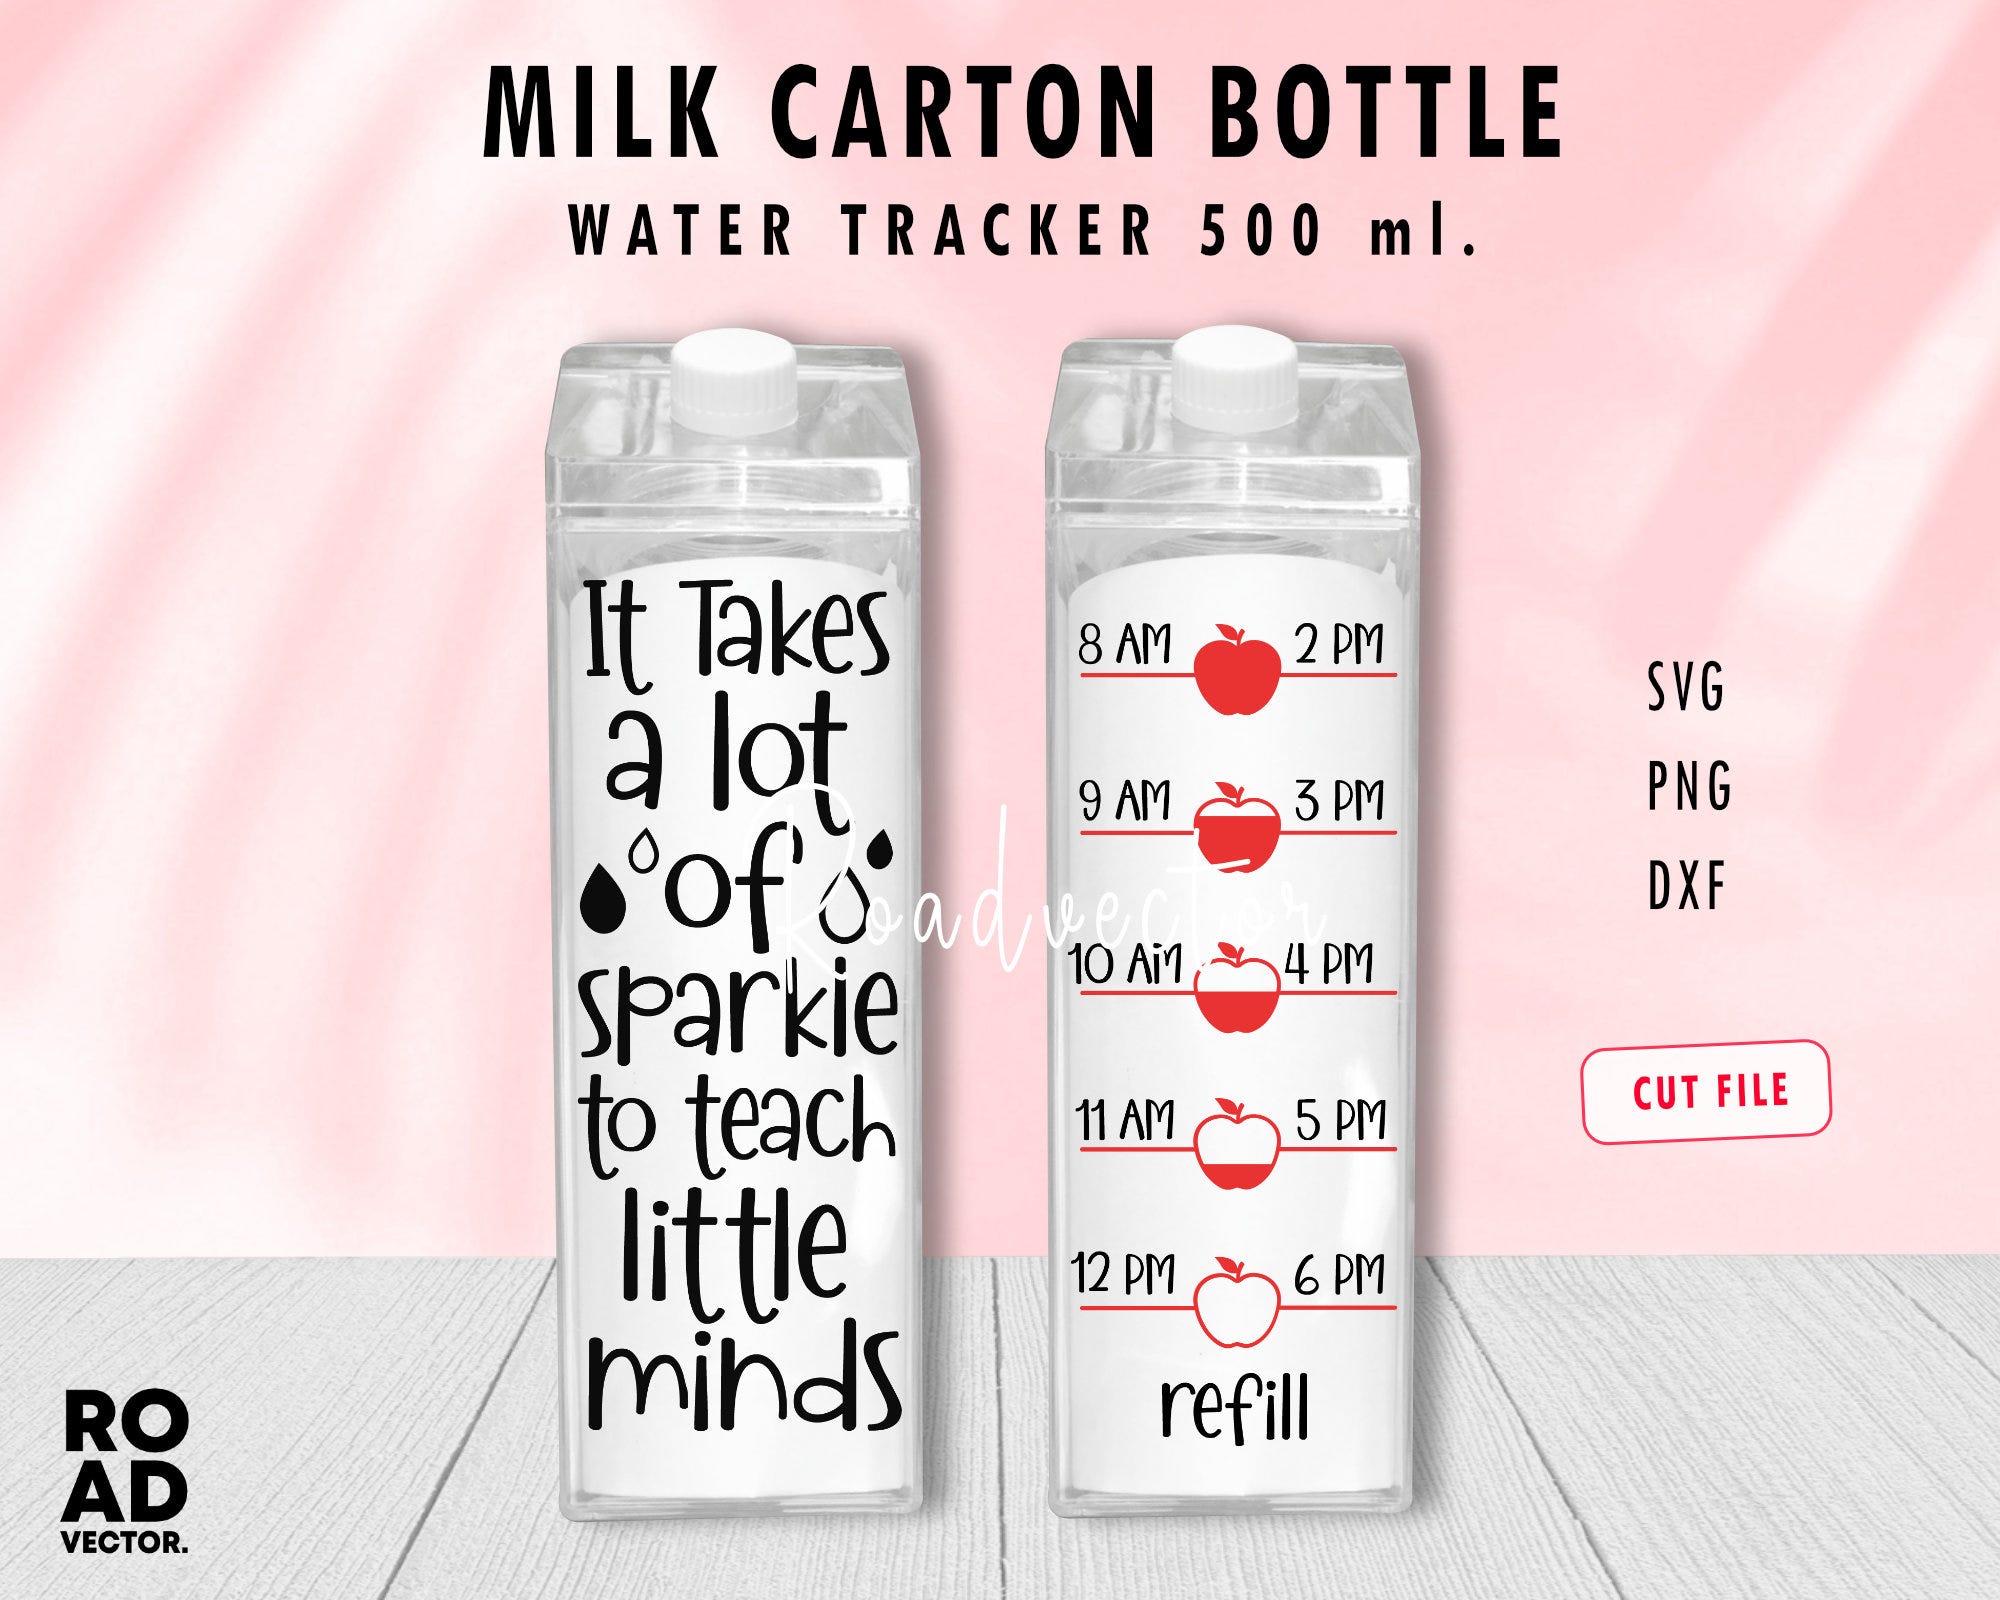 It Takes A Lot of Sparkle to Teach little minds svg, Teacher life water tracker, Milk carton bottle time tracker, Water tumbler decal 500 ml